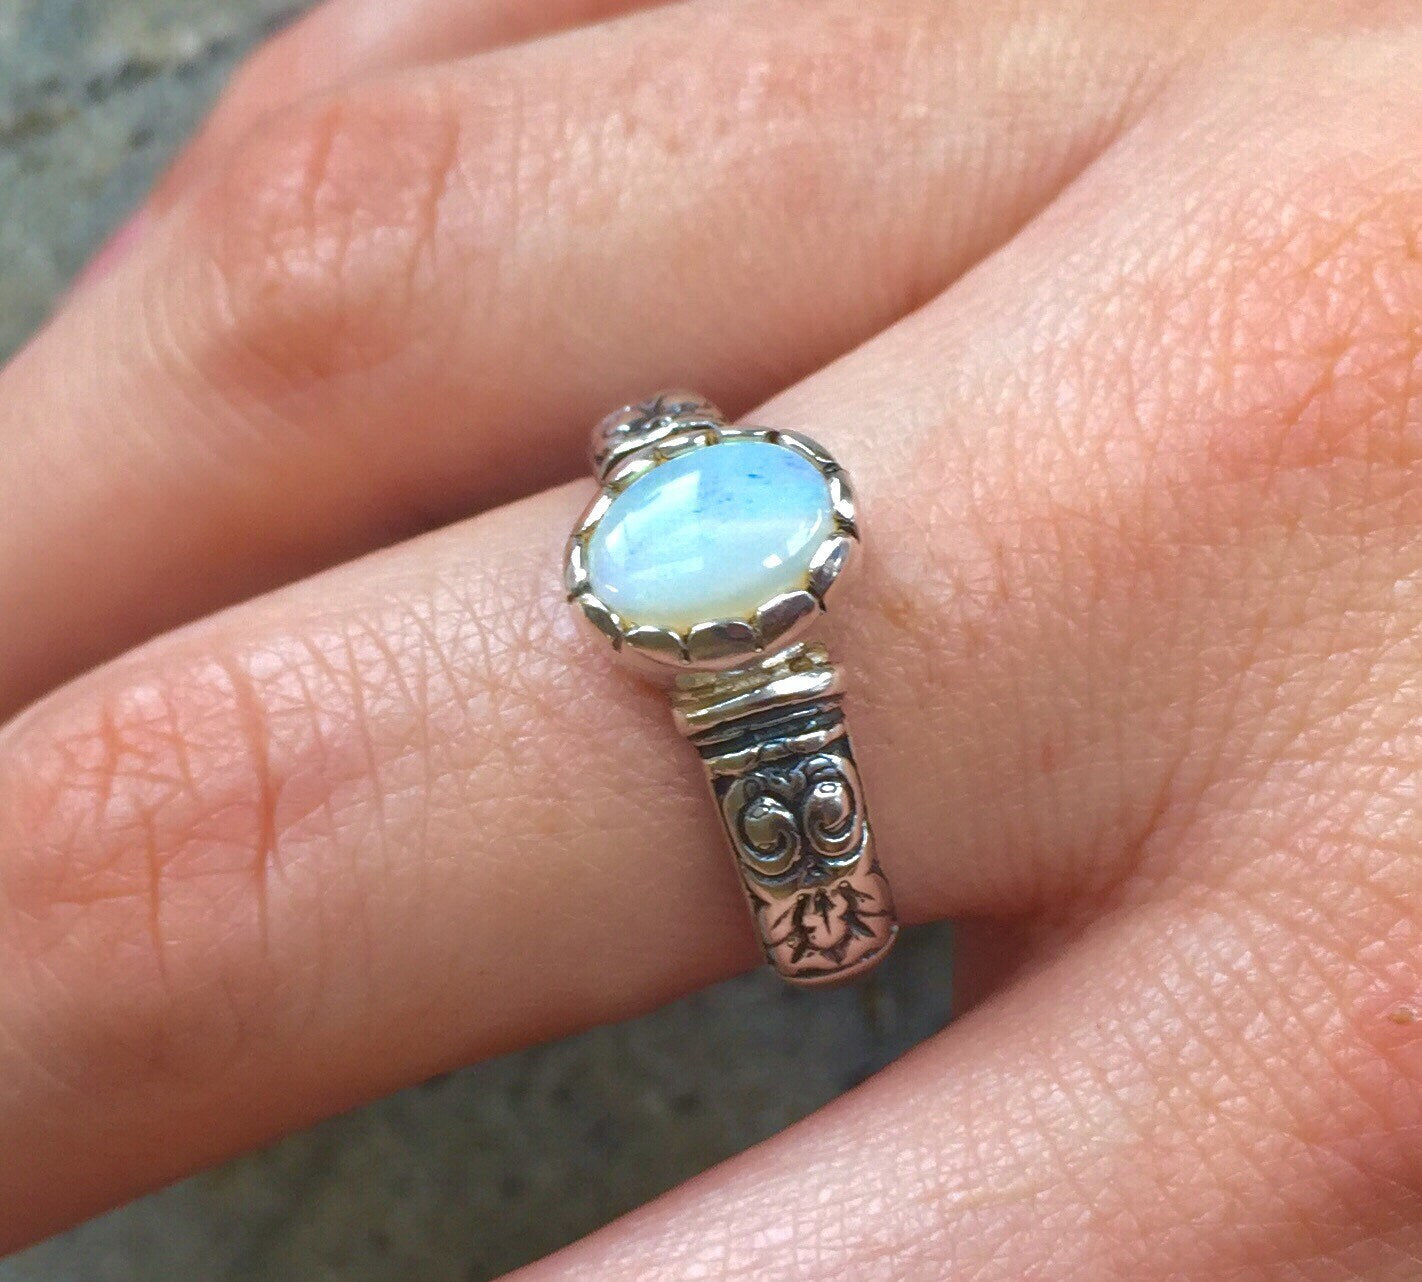 Opal Ring, Natural Opal Ring, Australian Opal, Natural Opal, Vintage Opal, Vintage Rings, Antique Opal, Solid Silver Ring, Antique Rings